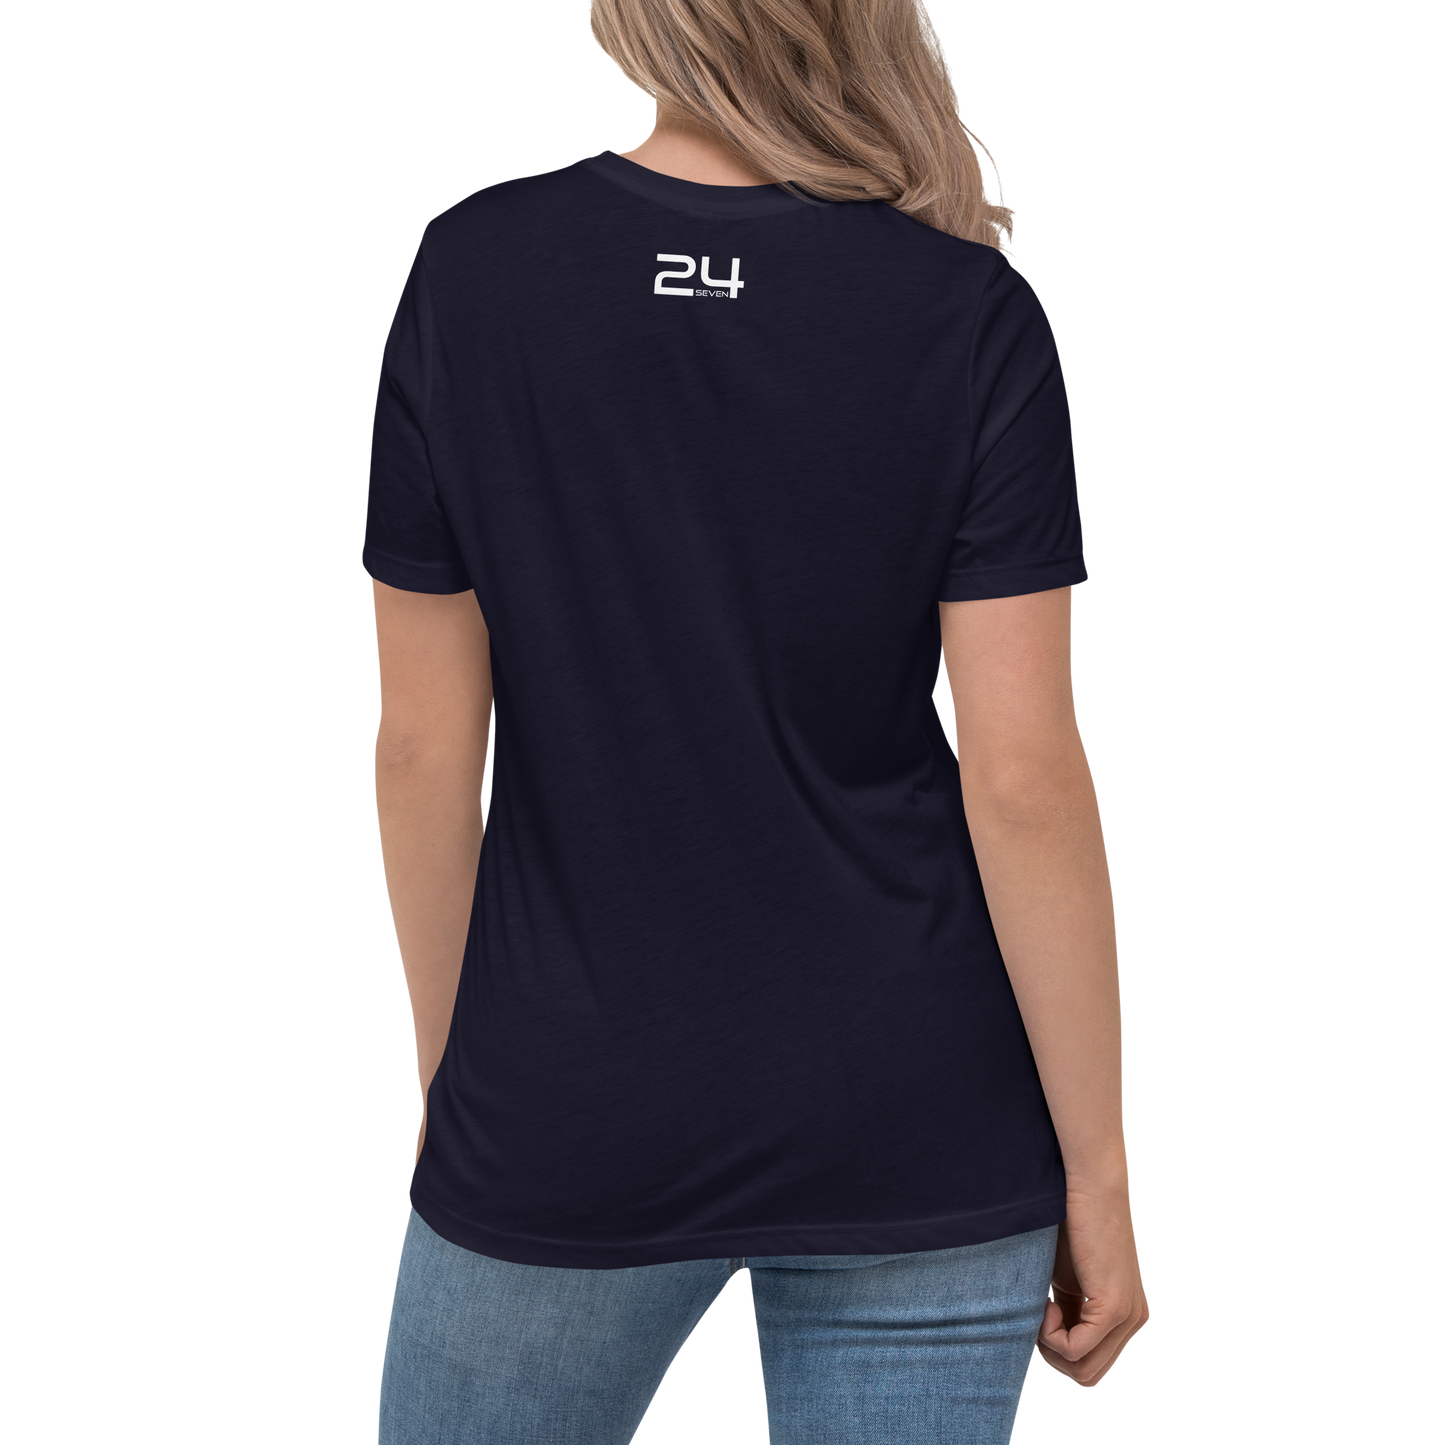 Surfer Embroidered Women's Relaxed T-Shirt